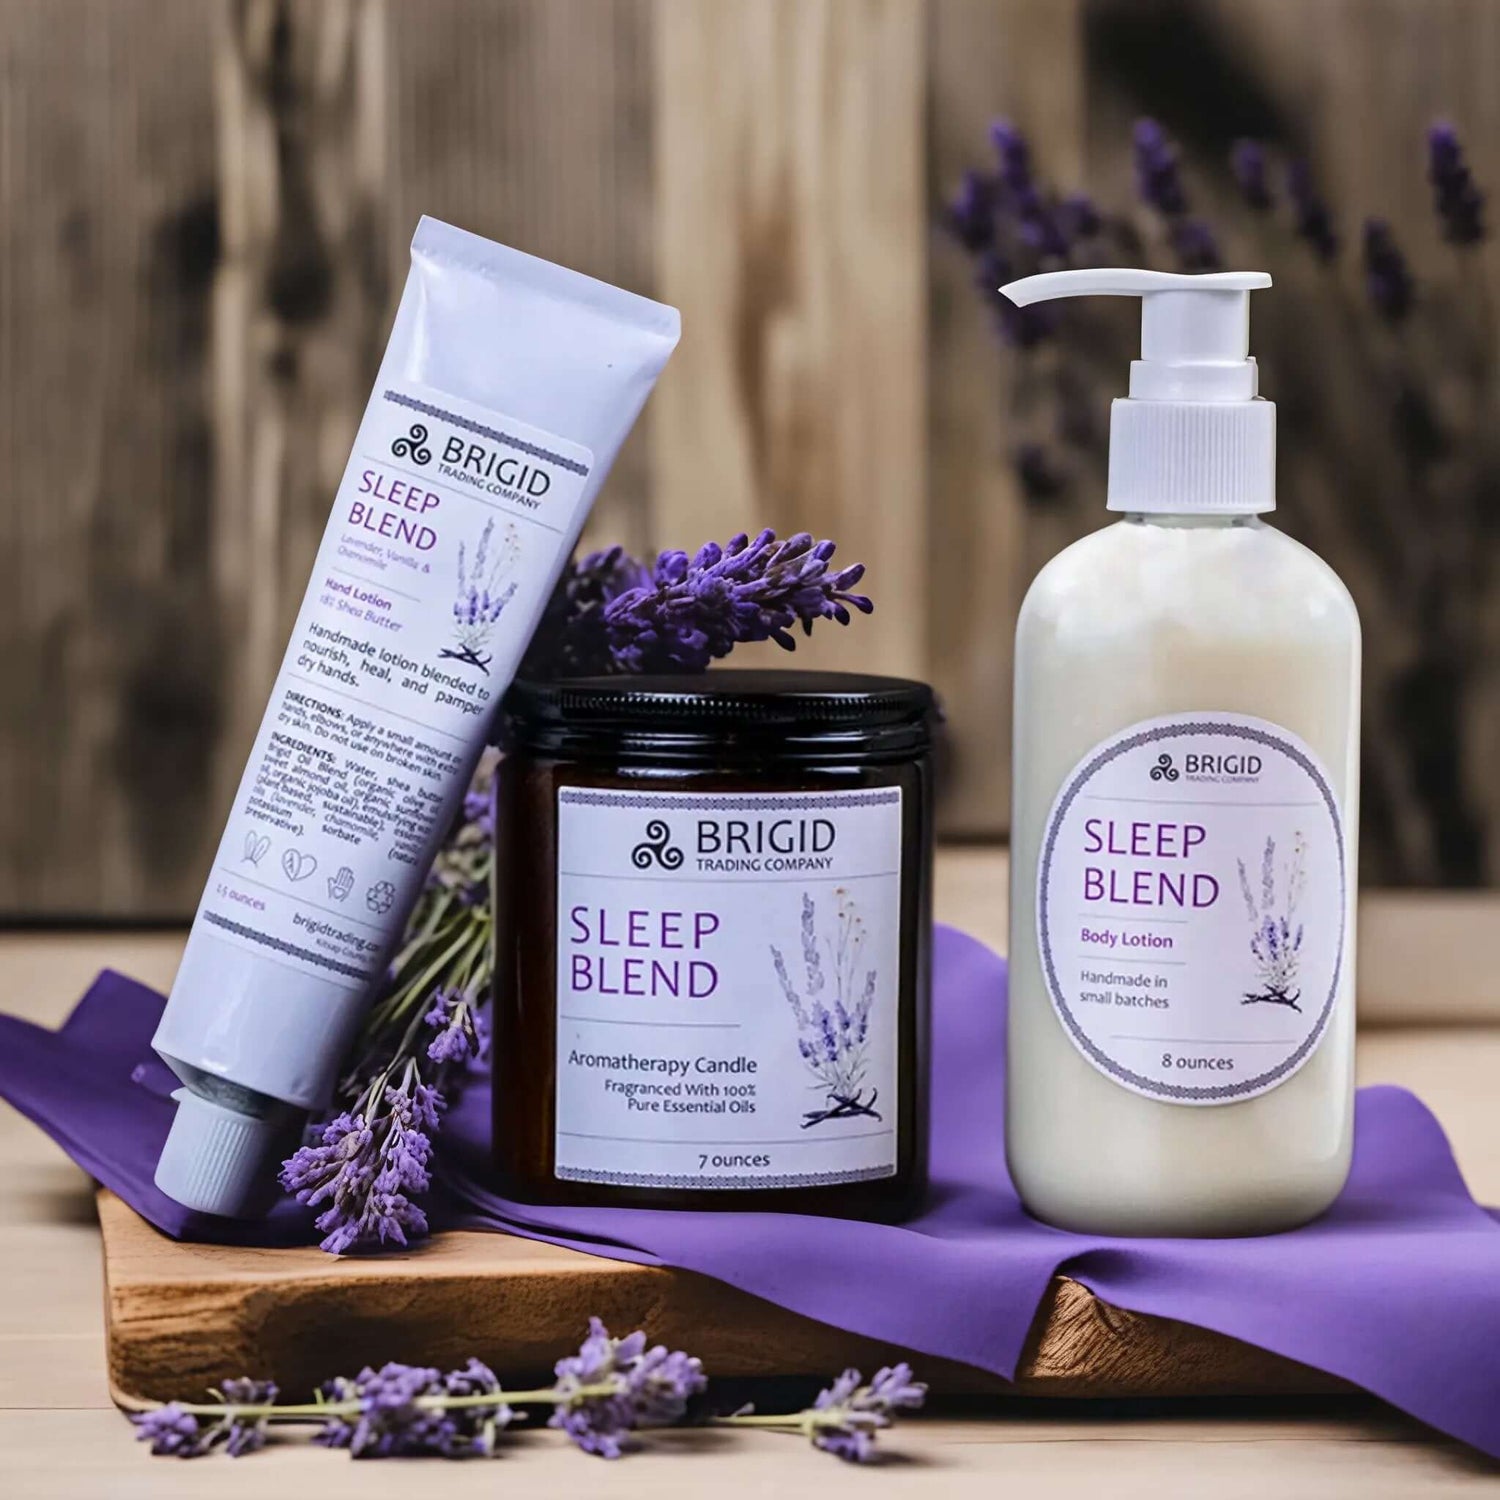 sleep blend premium aromatherapy grade essential oil candle candles by brigid trading company washington state united states ireland seven ounces kitsap therapy therapeutic benefits natural health lavender chamomile vanilla sleepytime